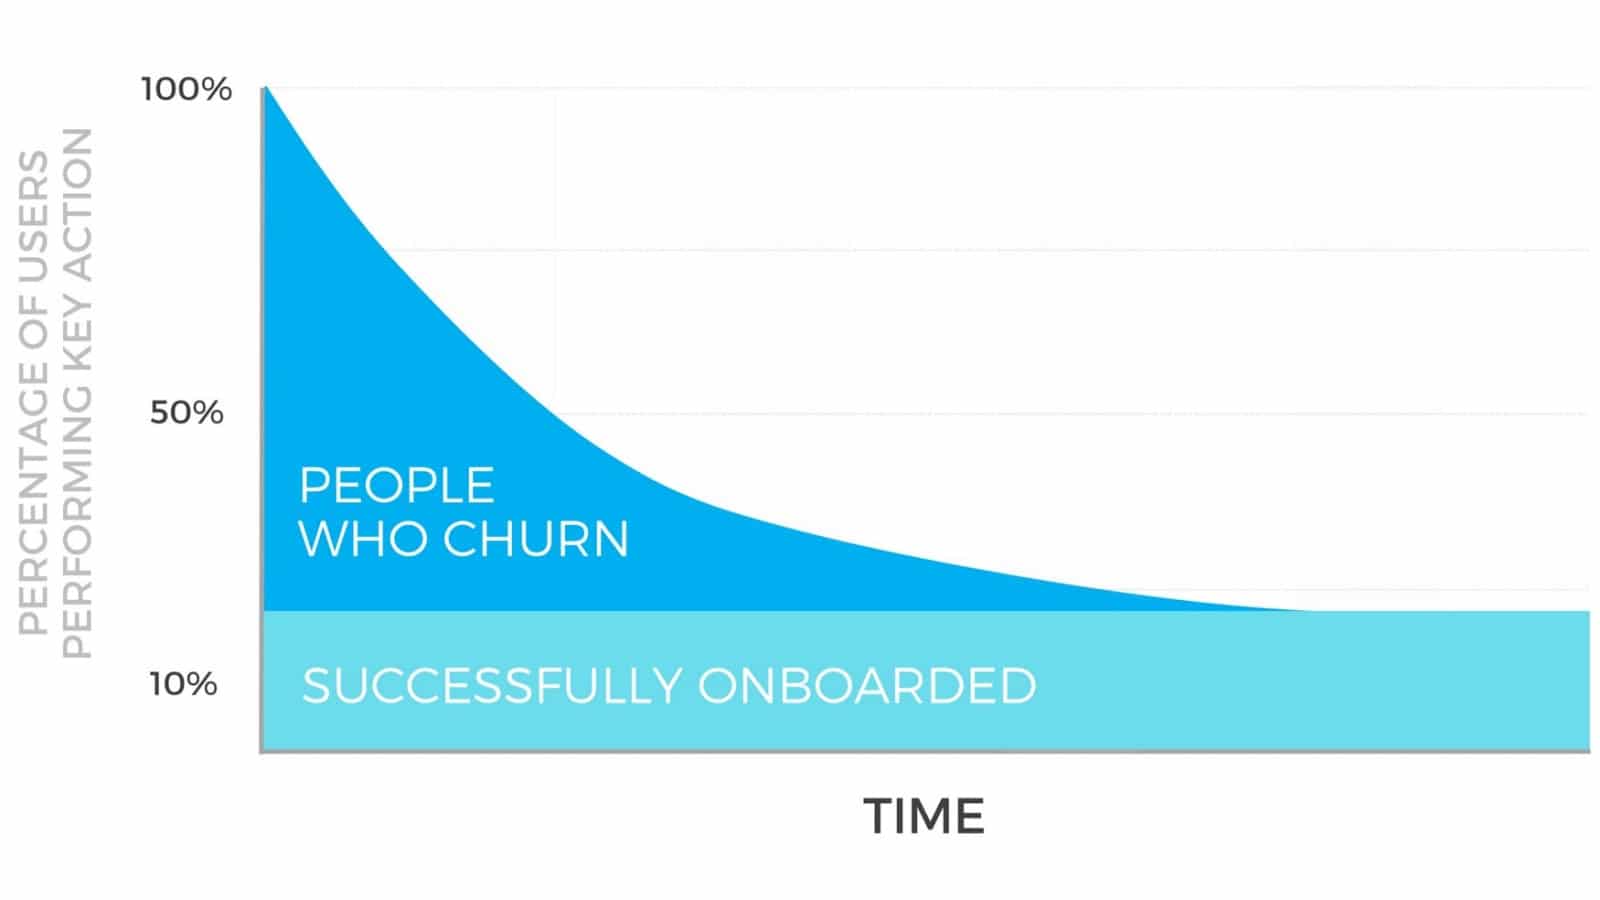 Percentage of Users Performing Key Action - People Who Churn - Successfully Onboarded